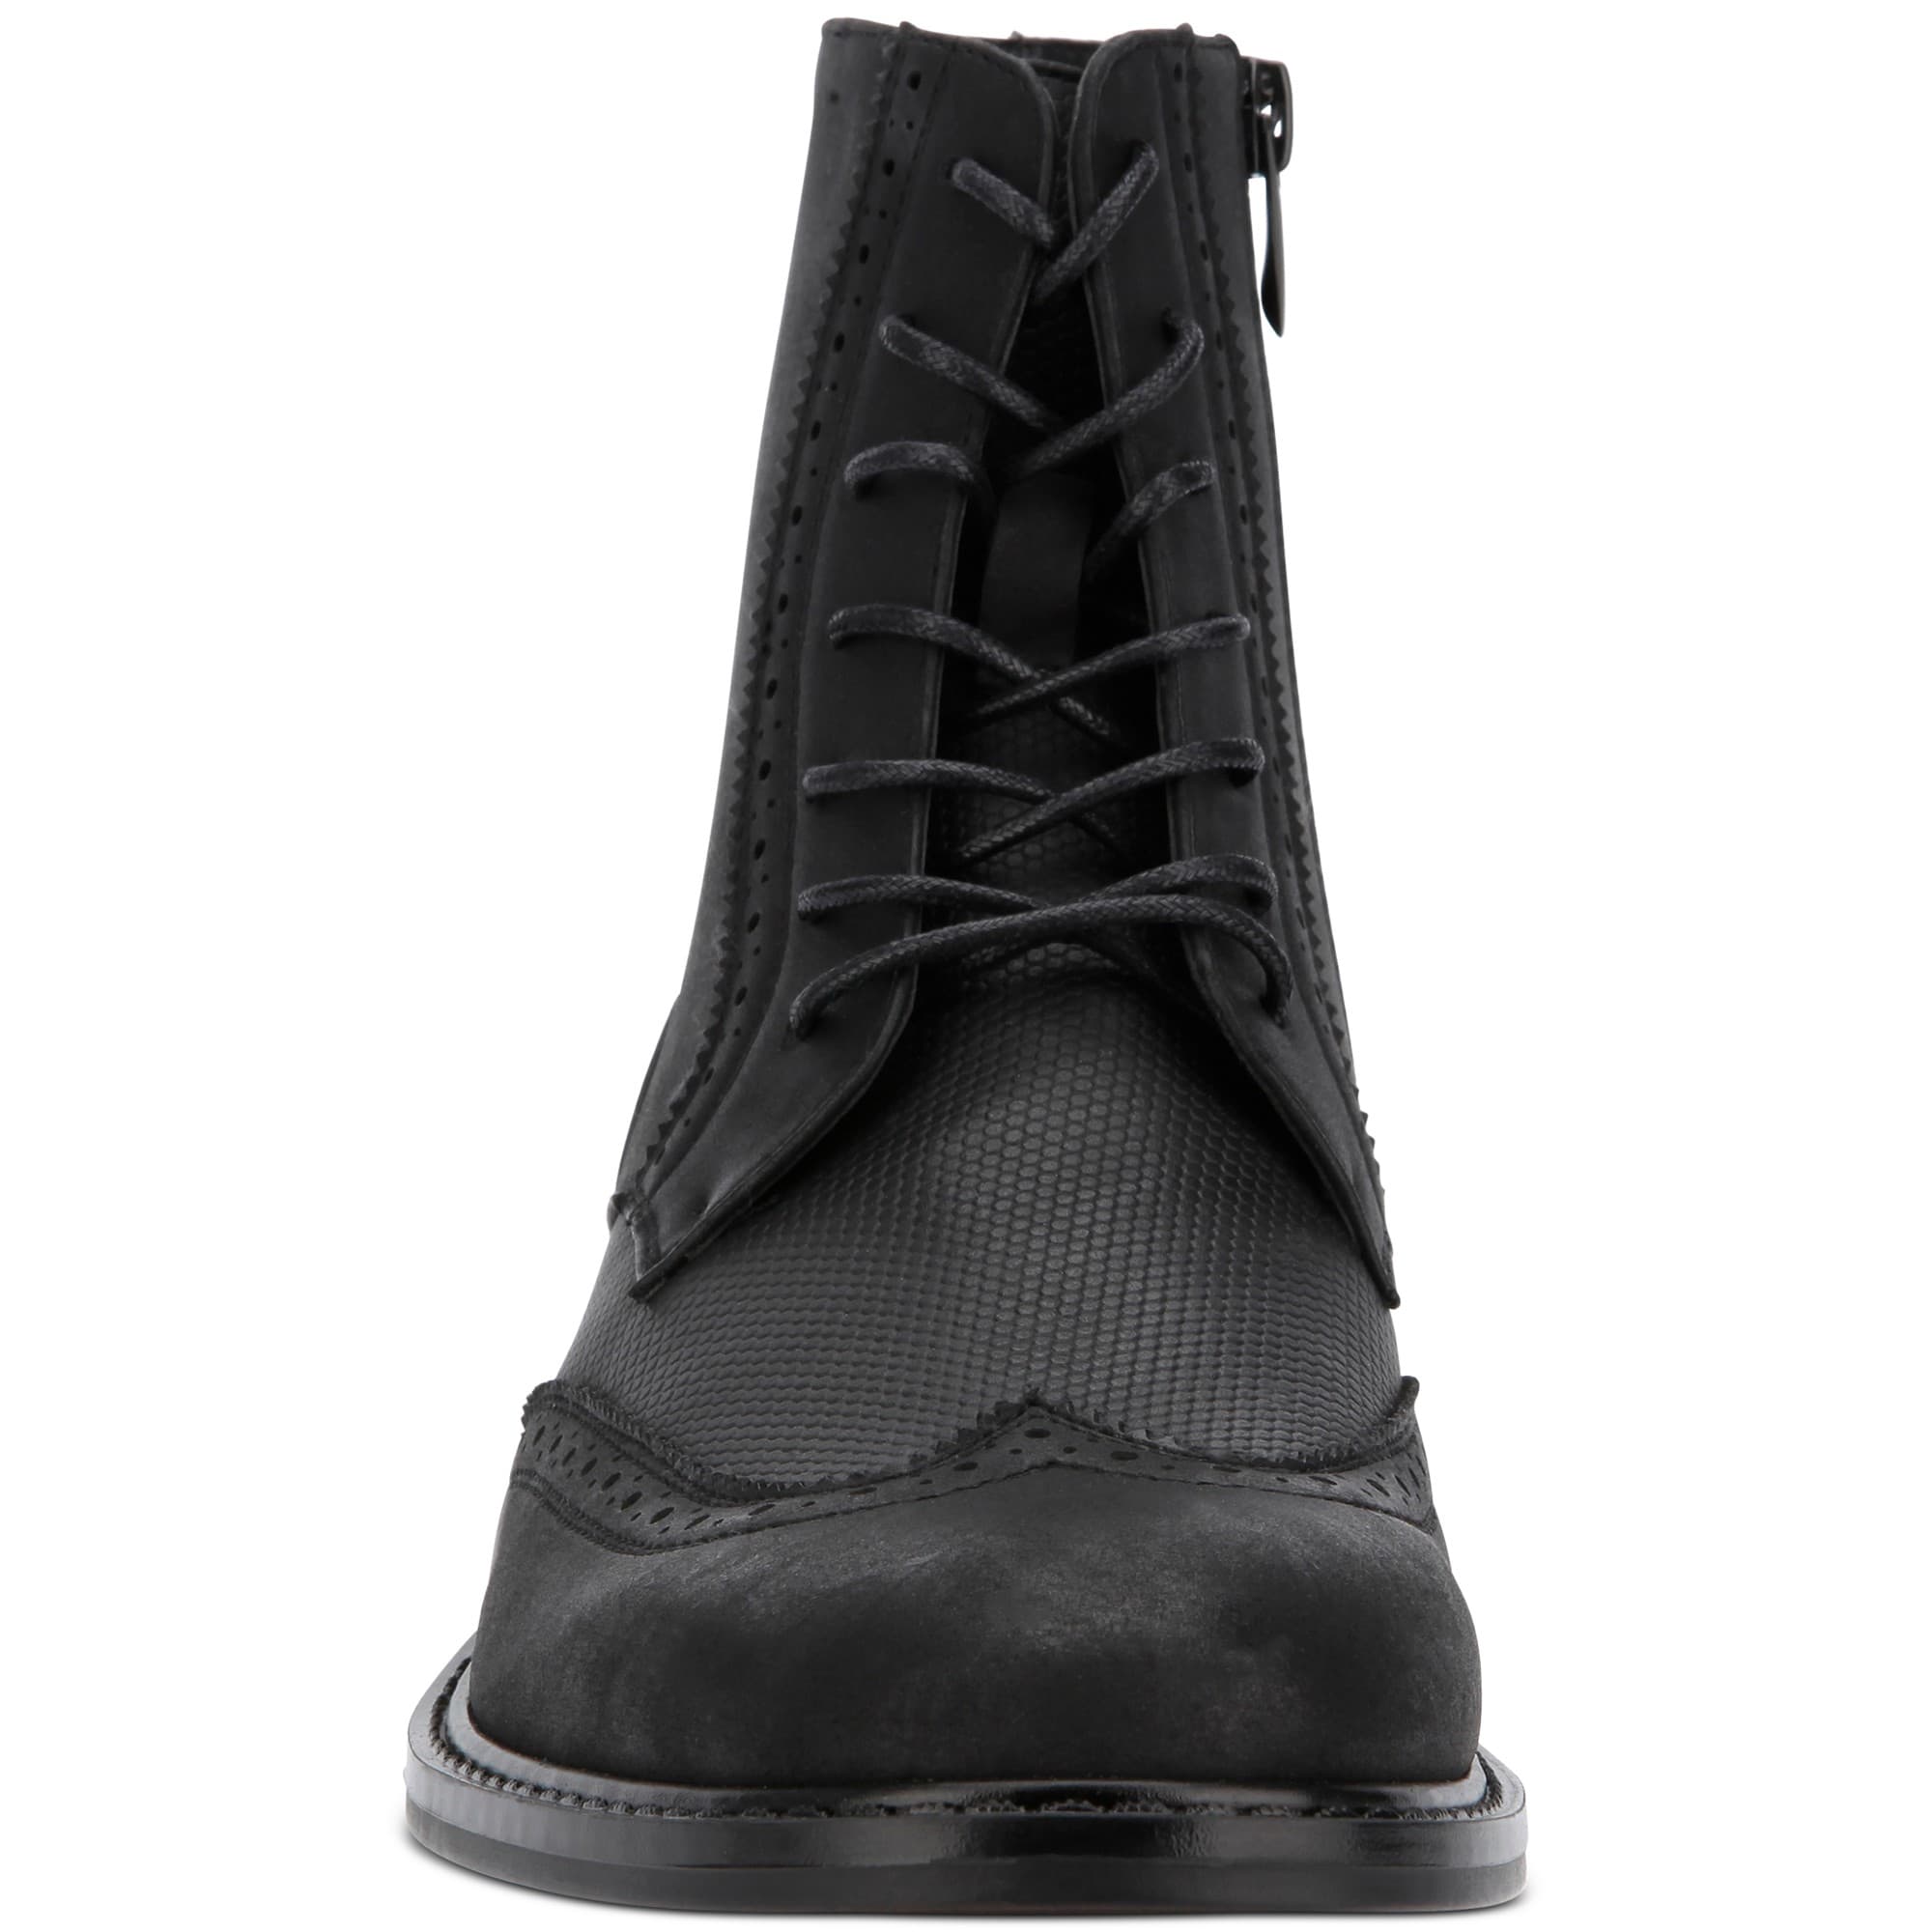 woocommerce-673321-2209615.cloudwaysapps.com-unlisted-by-kenneth-cole-mens-black-buzzer-boots